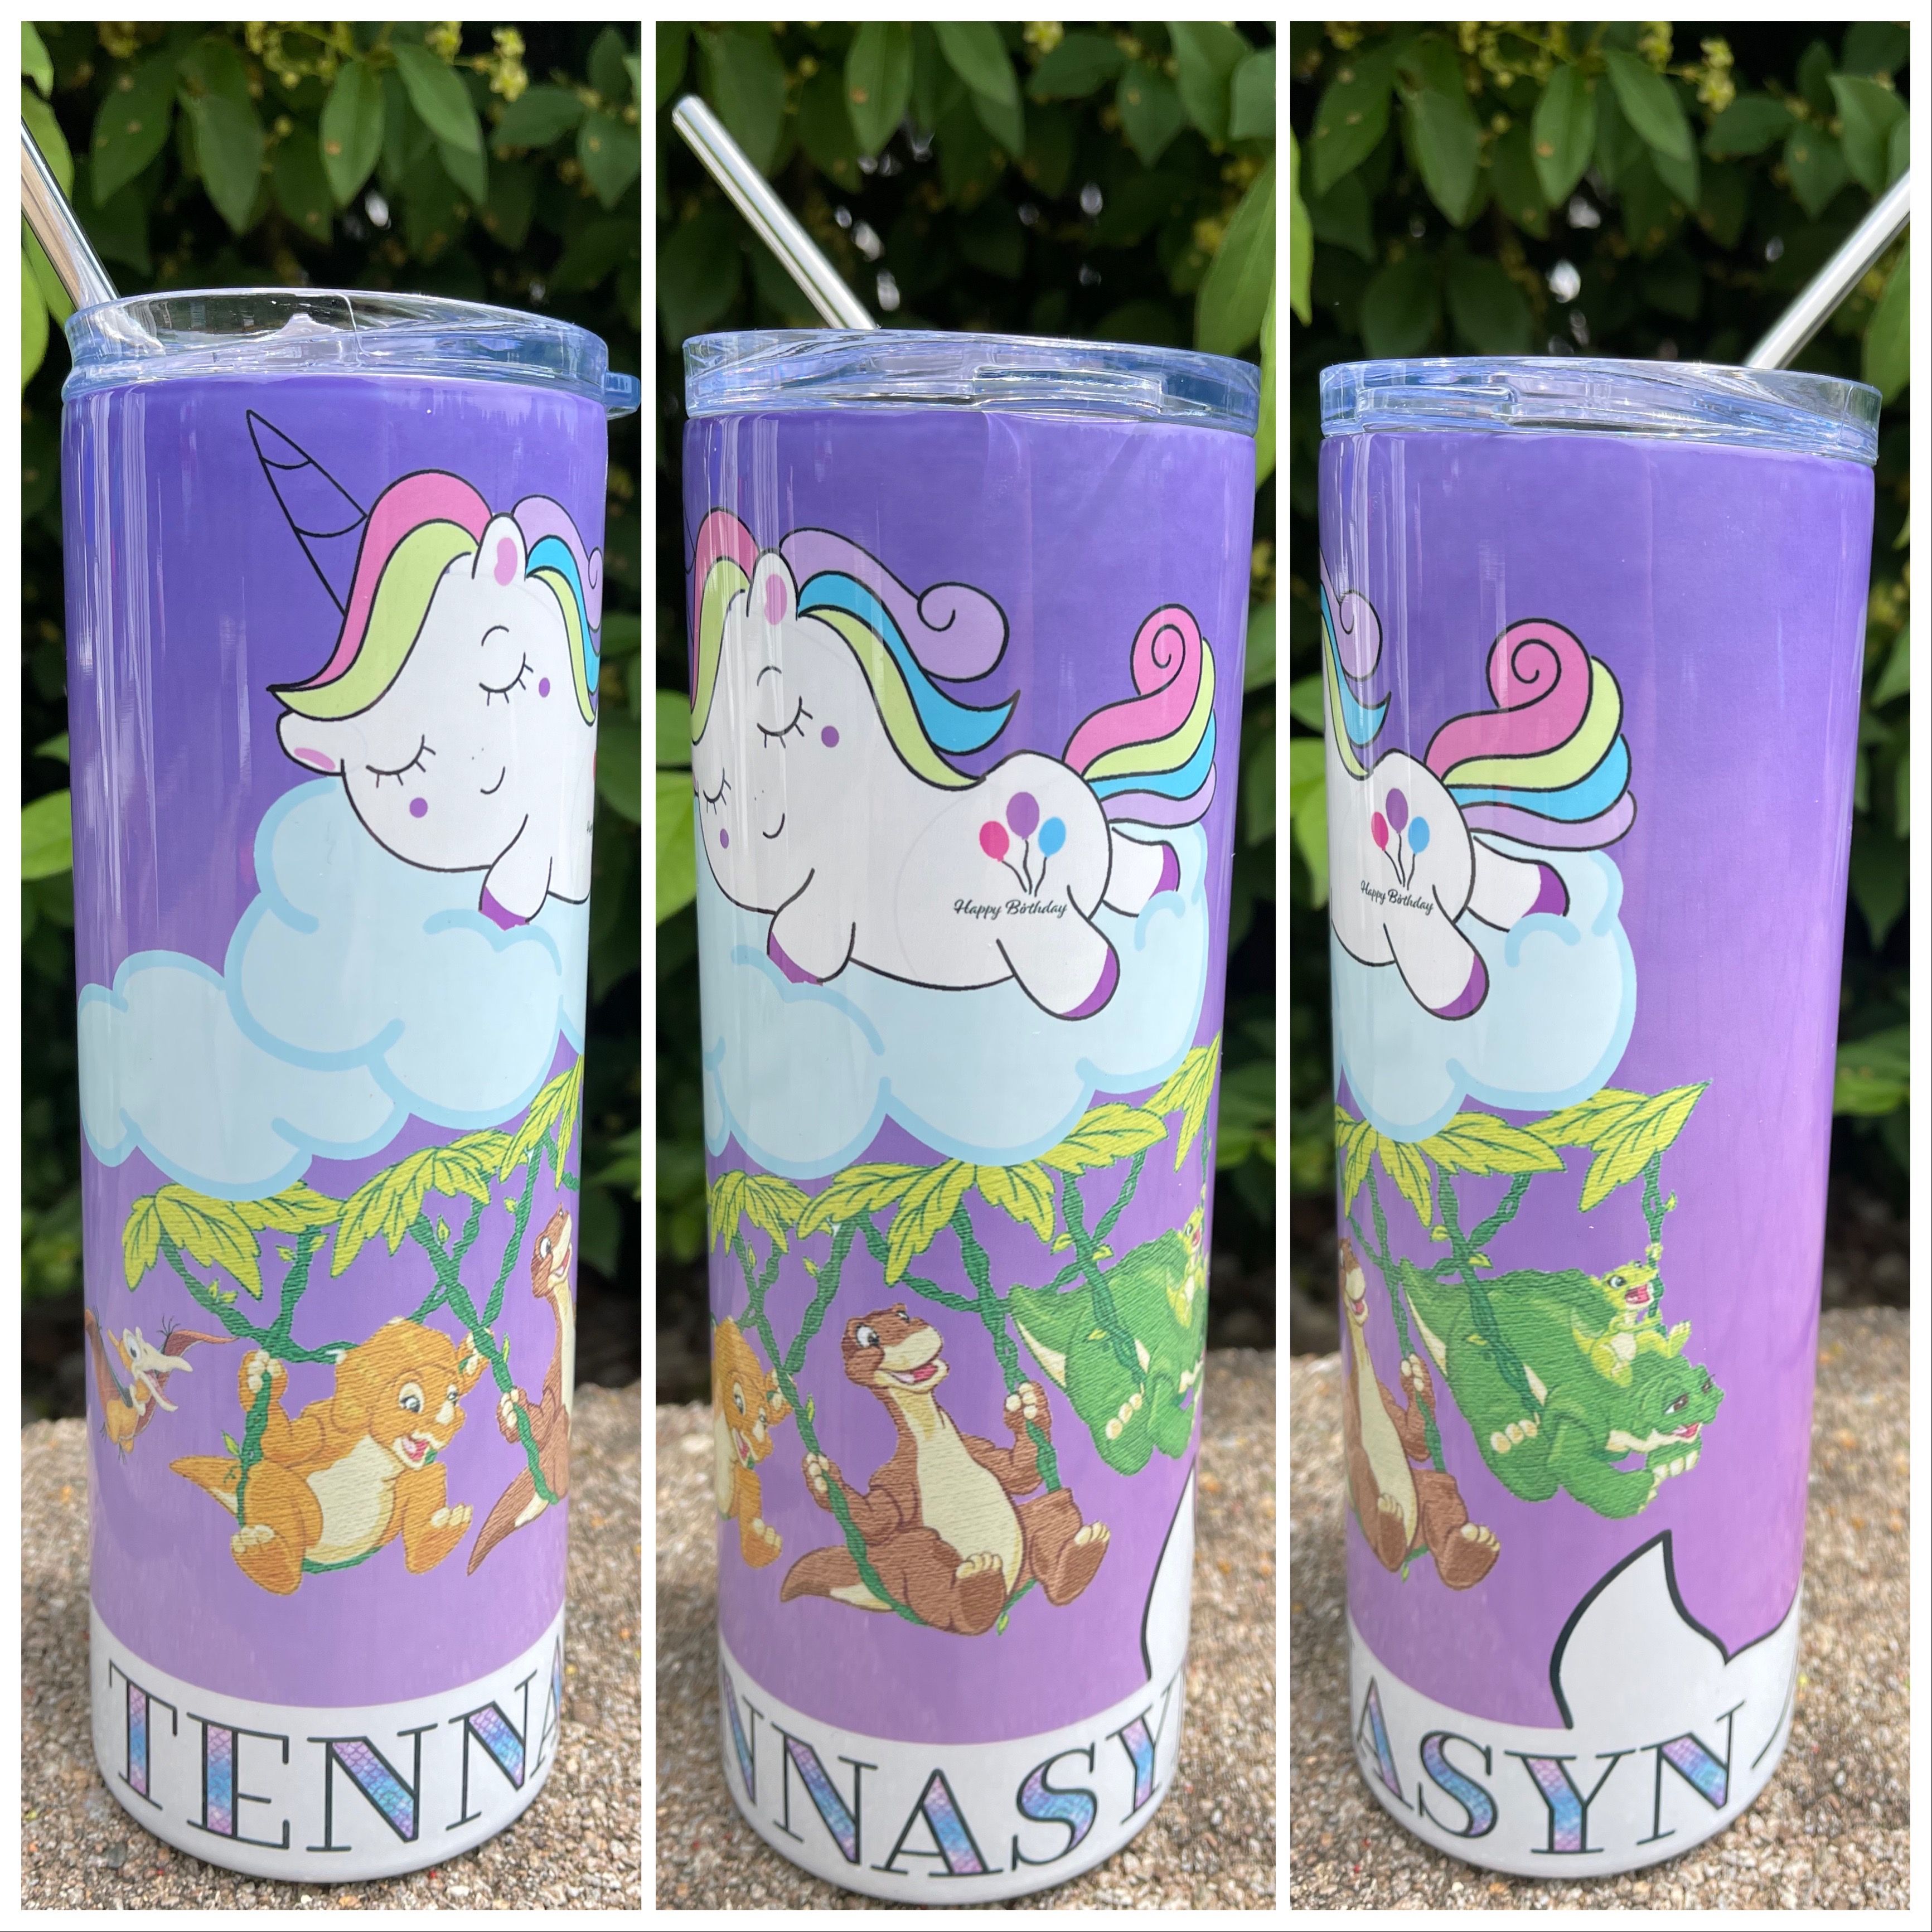 Dinos, Unicorns, and Mermaids! OH MY!  made with sublimation printing